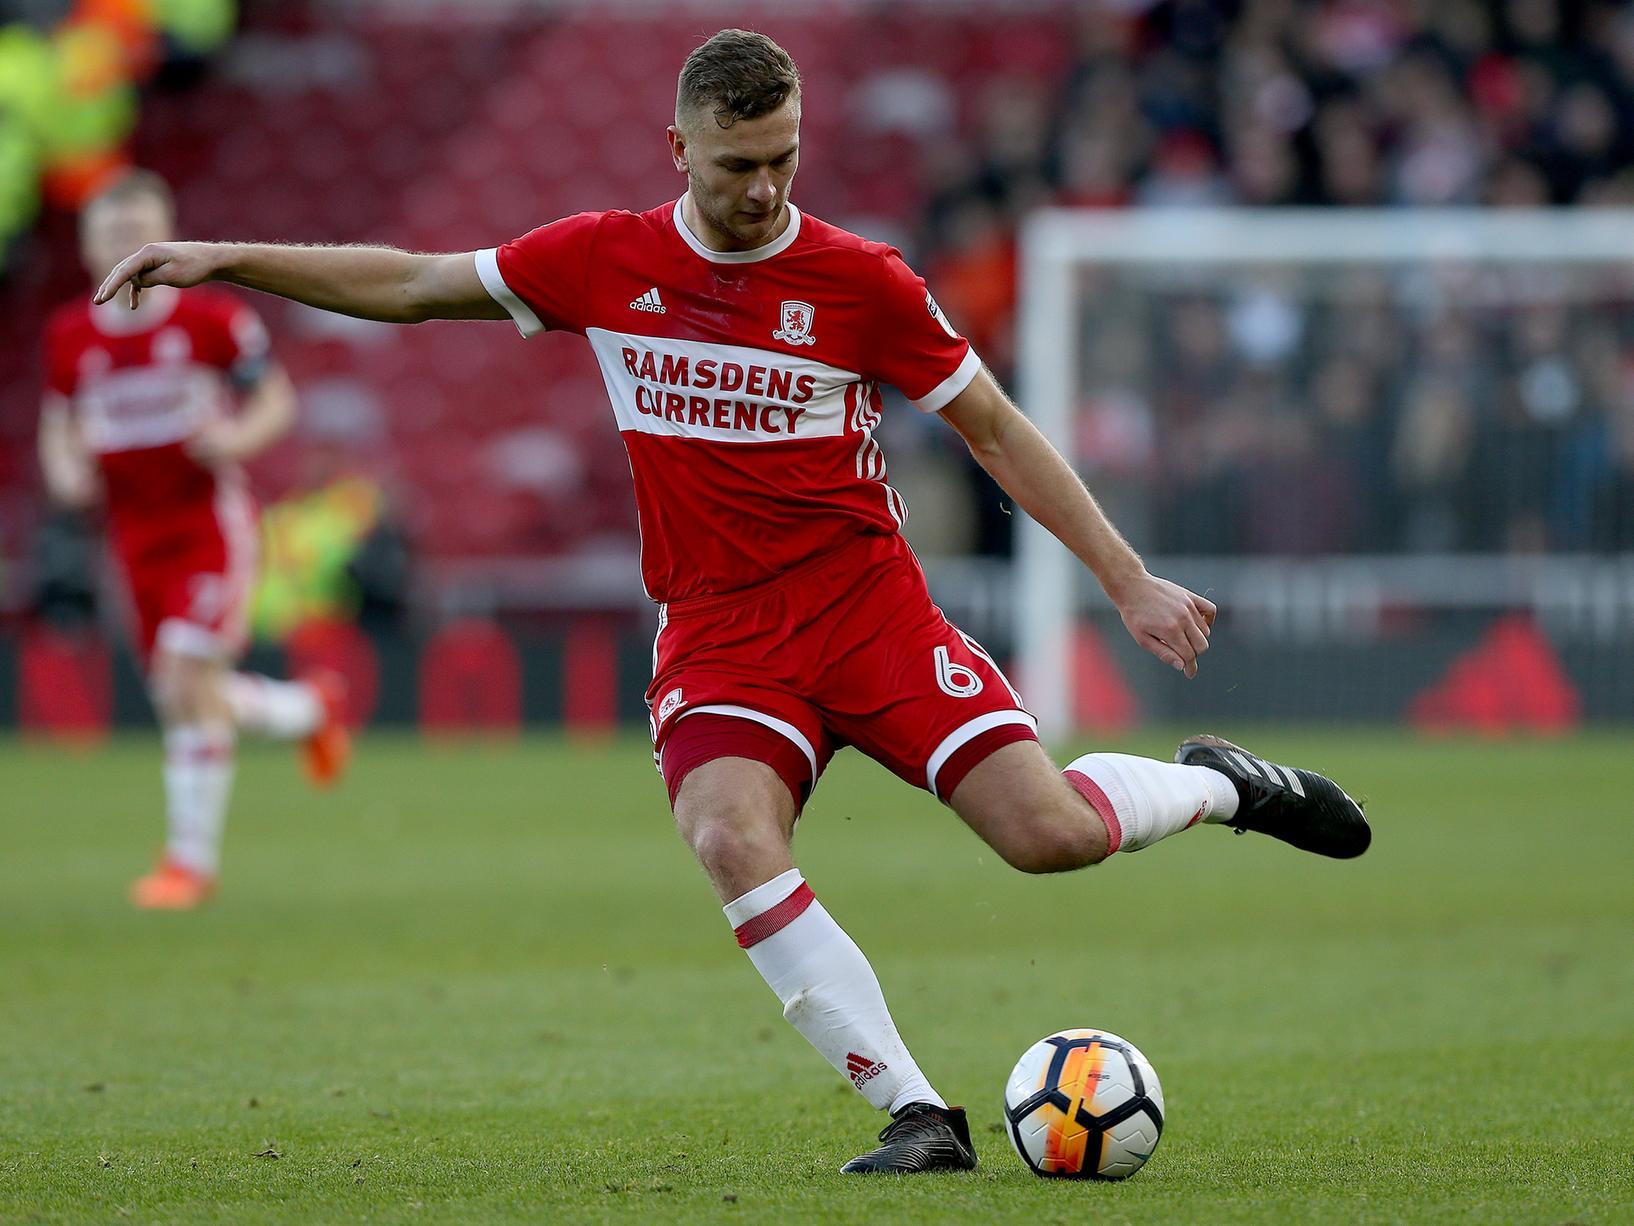 Sean Dyche continues to be tight-lipped about Burnley transfers as the uncertainty surrounding Ben Gibson's short-term future, Middlesborough are reportedly interested. (Teesside Gazette)